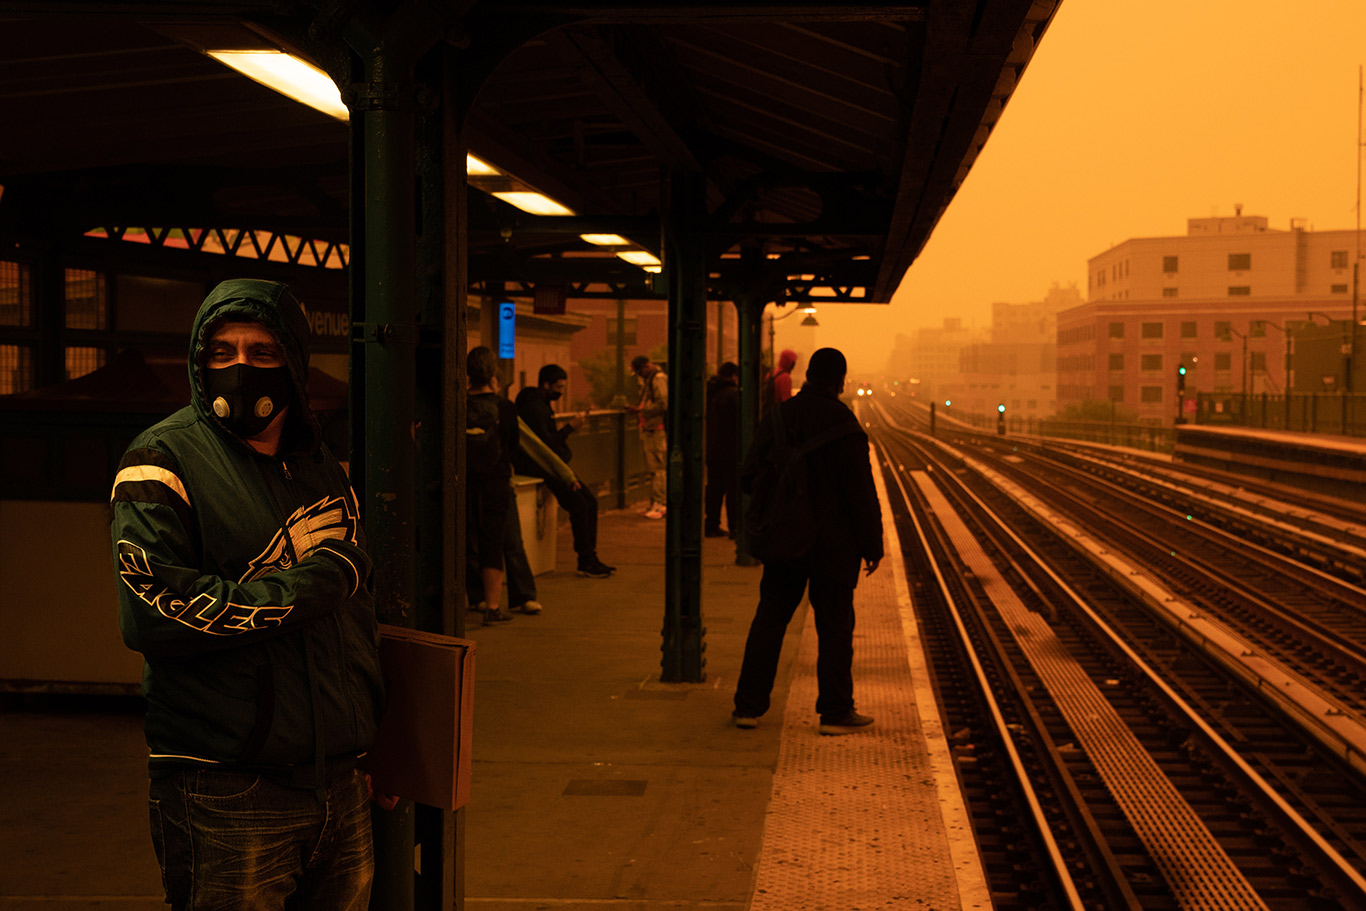 A person wearing a face mask waits for the subway in New York City with an orange, smokey sky in the background